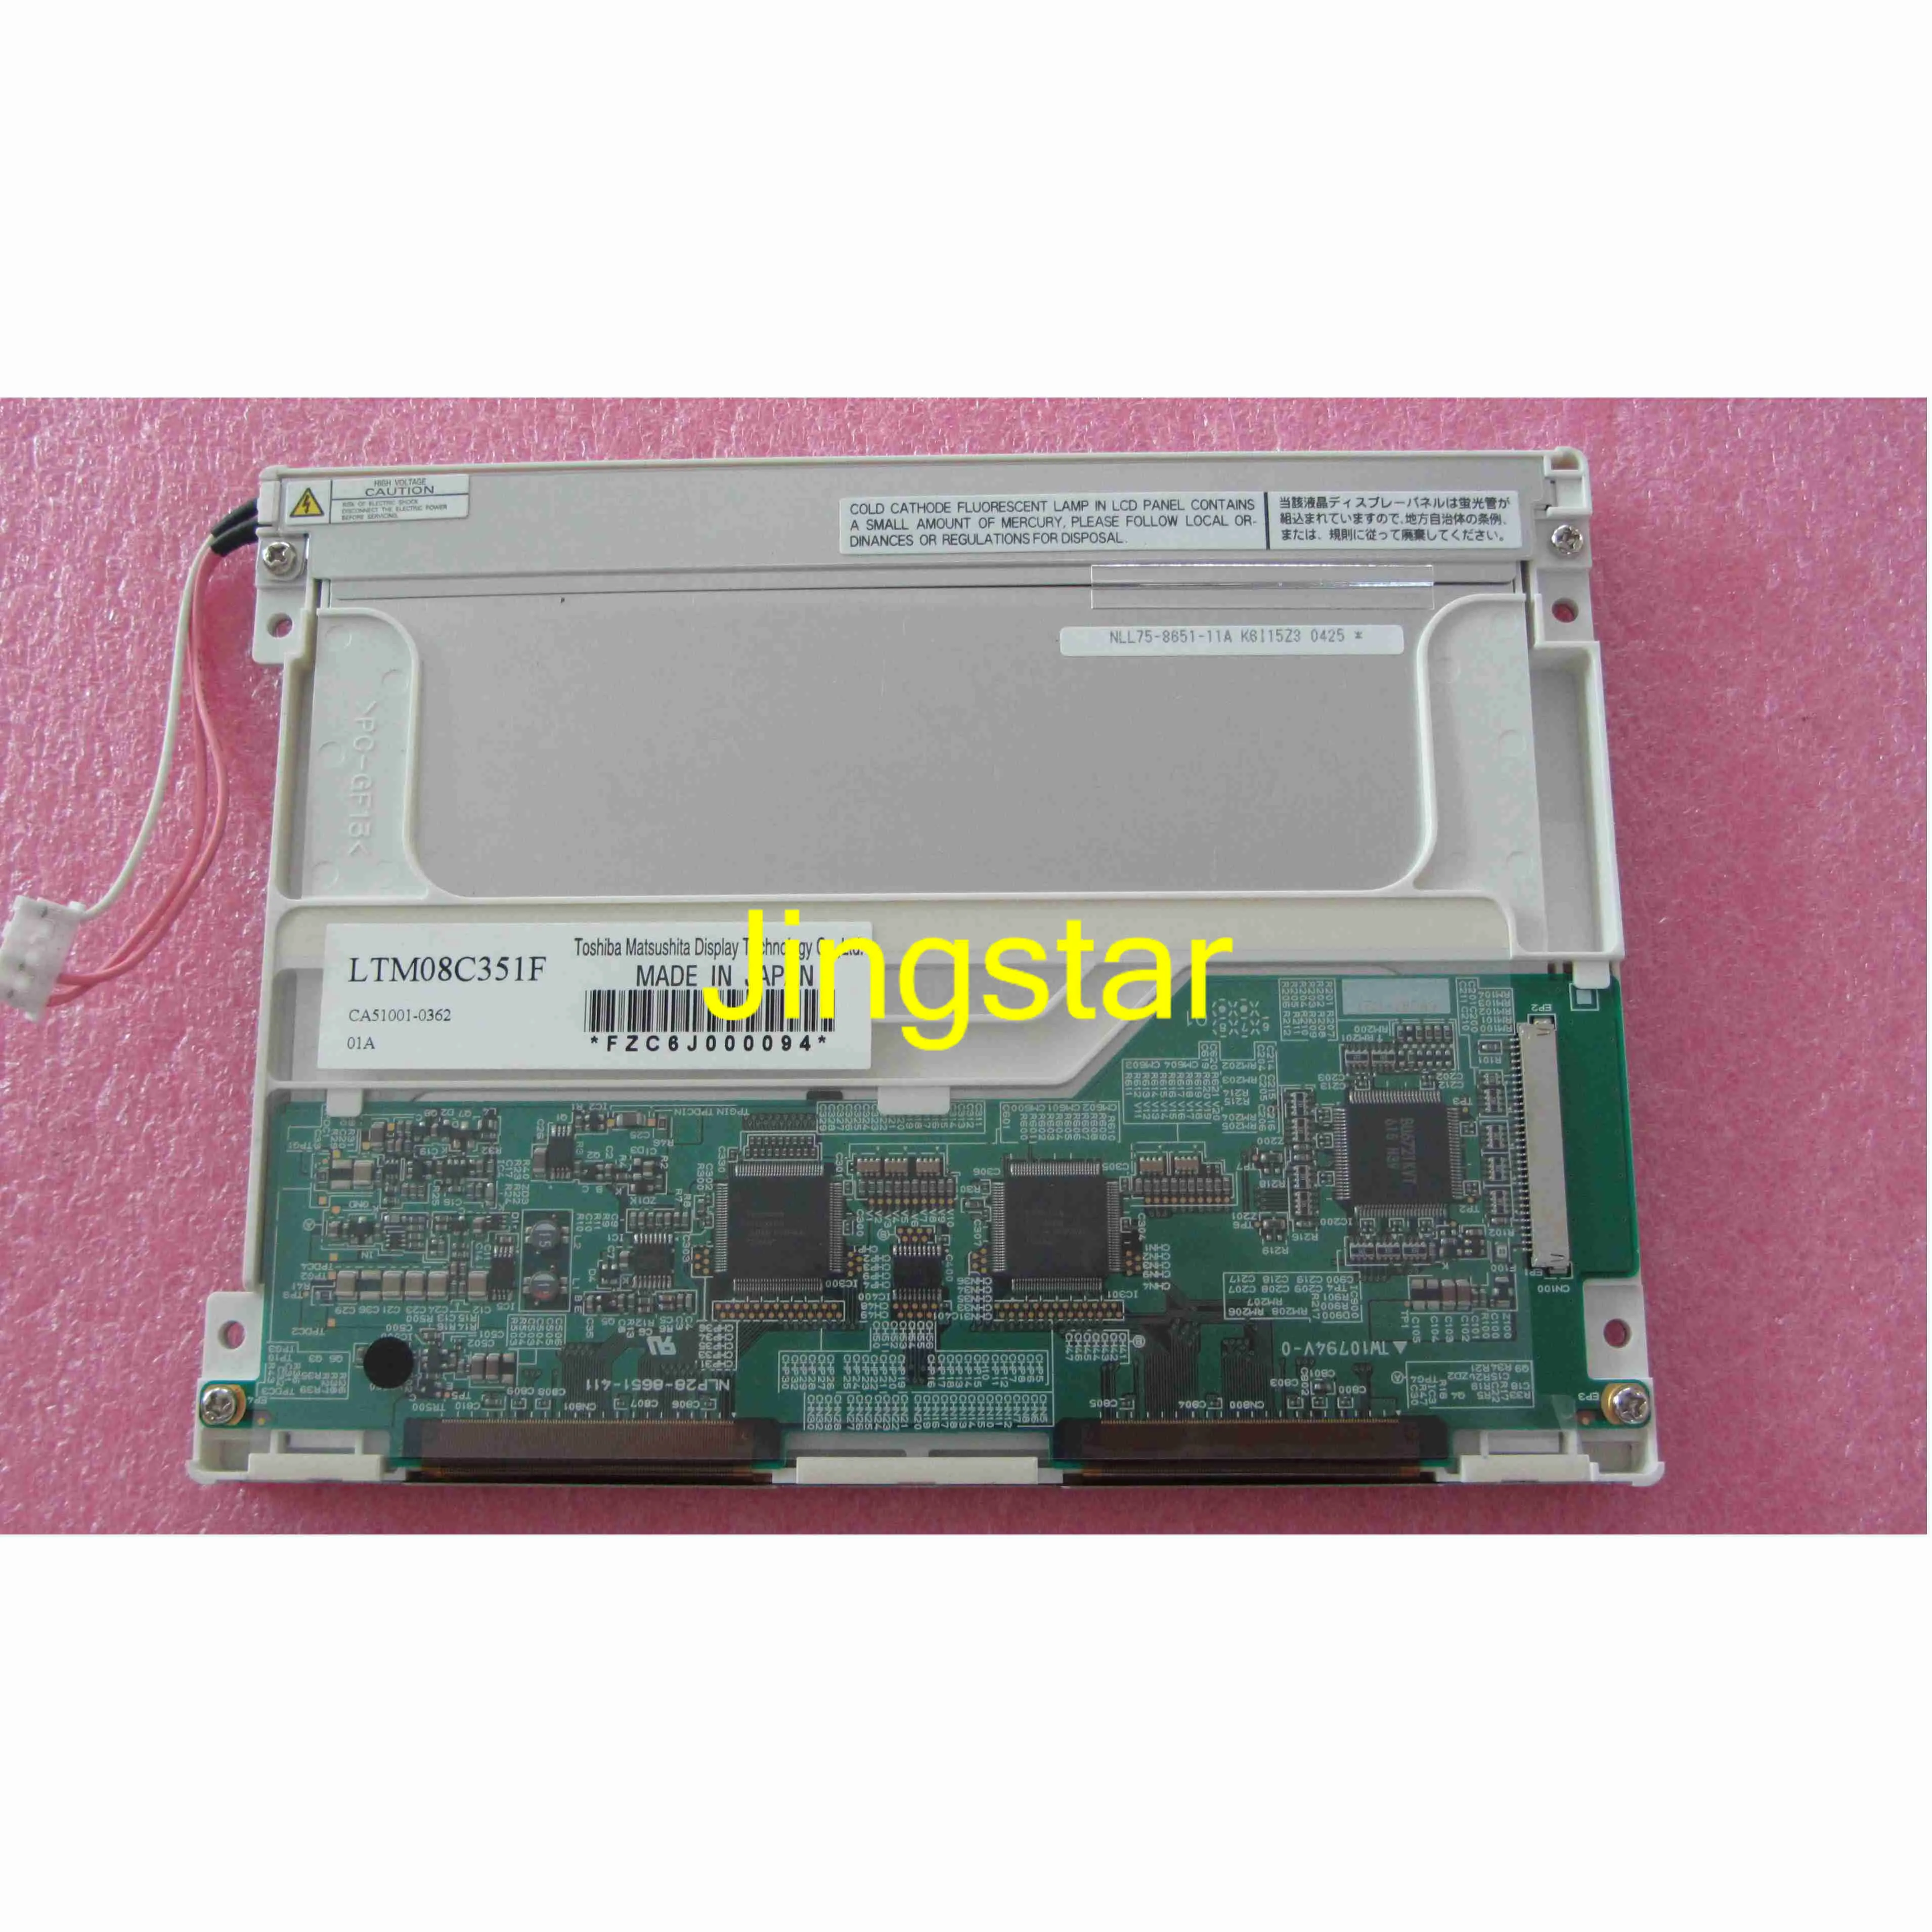 LTM08C351F professional Industrial LCD Modules sales with tested ok and warranty